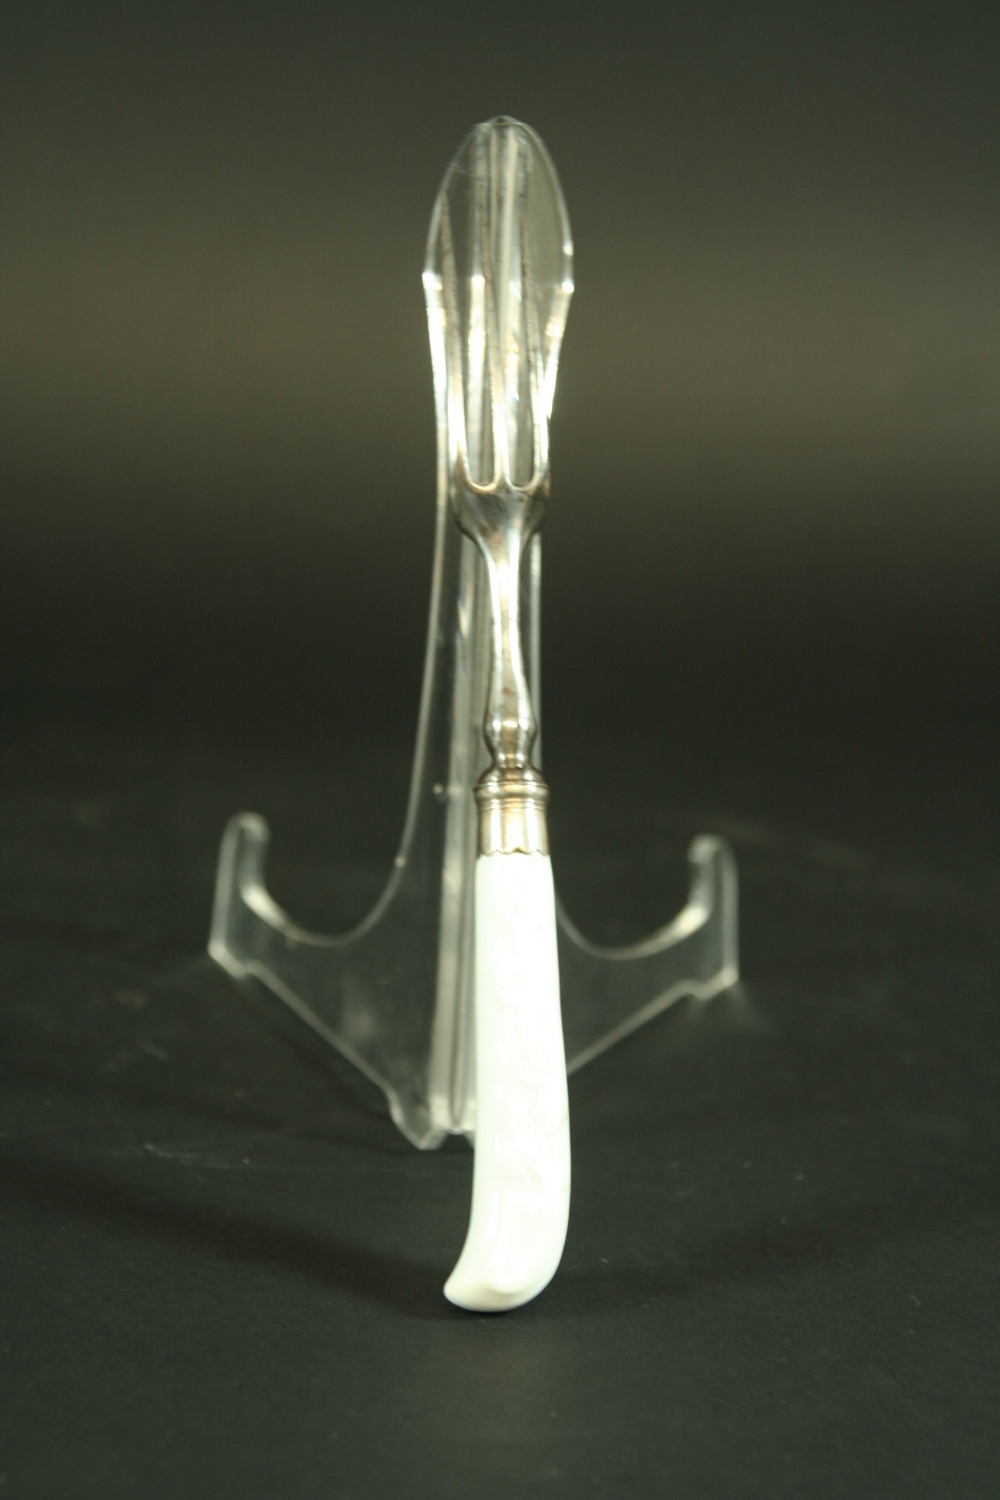 AN 18TH CENTURY FORK with pistol grip handle, moulded in low relief with foliate decoration